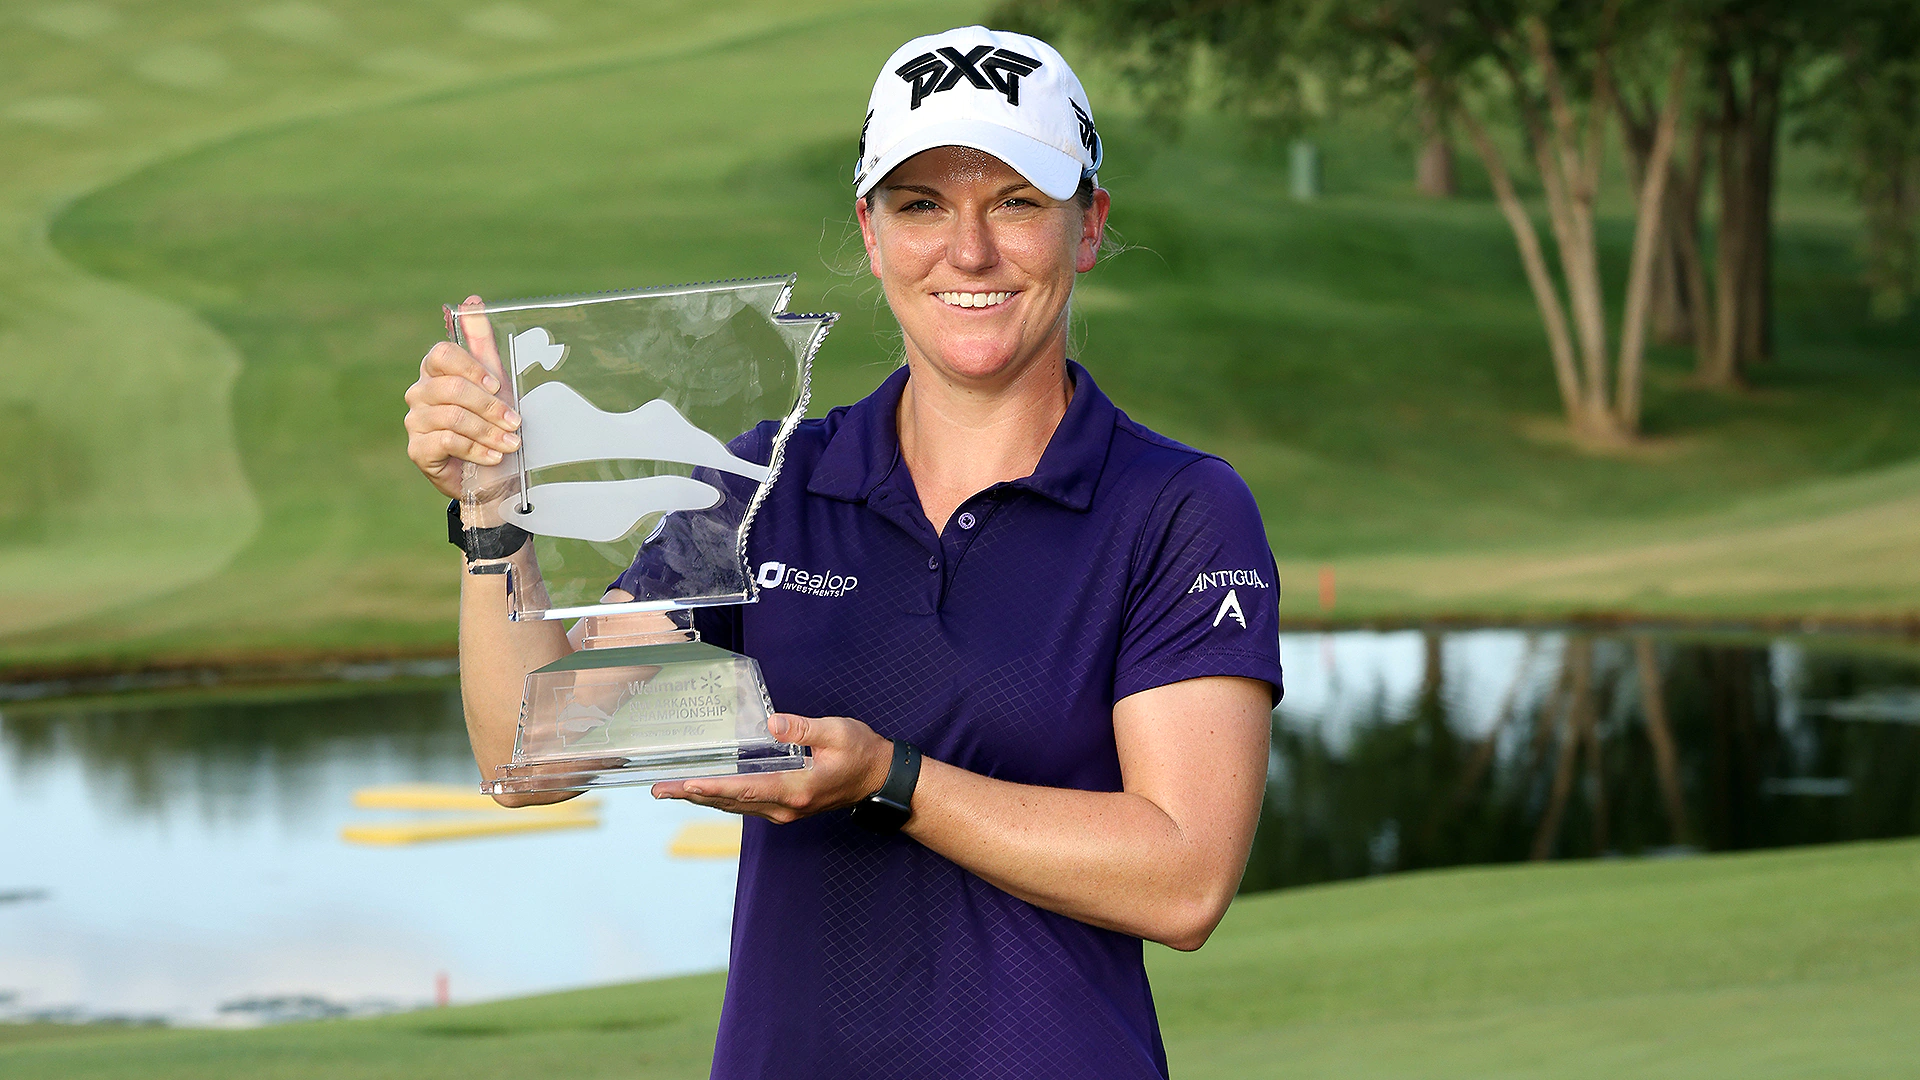 Austin Ernst fires 63 to win second LPGA event at NW Arkansas Championship